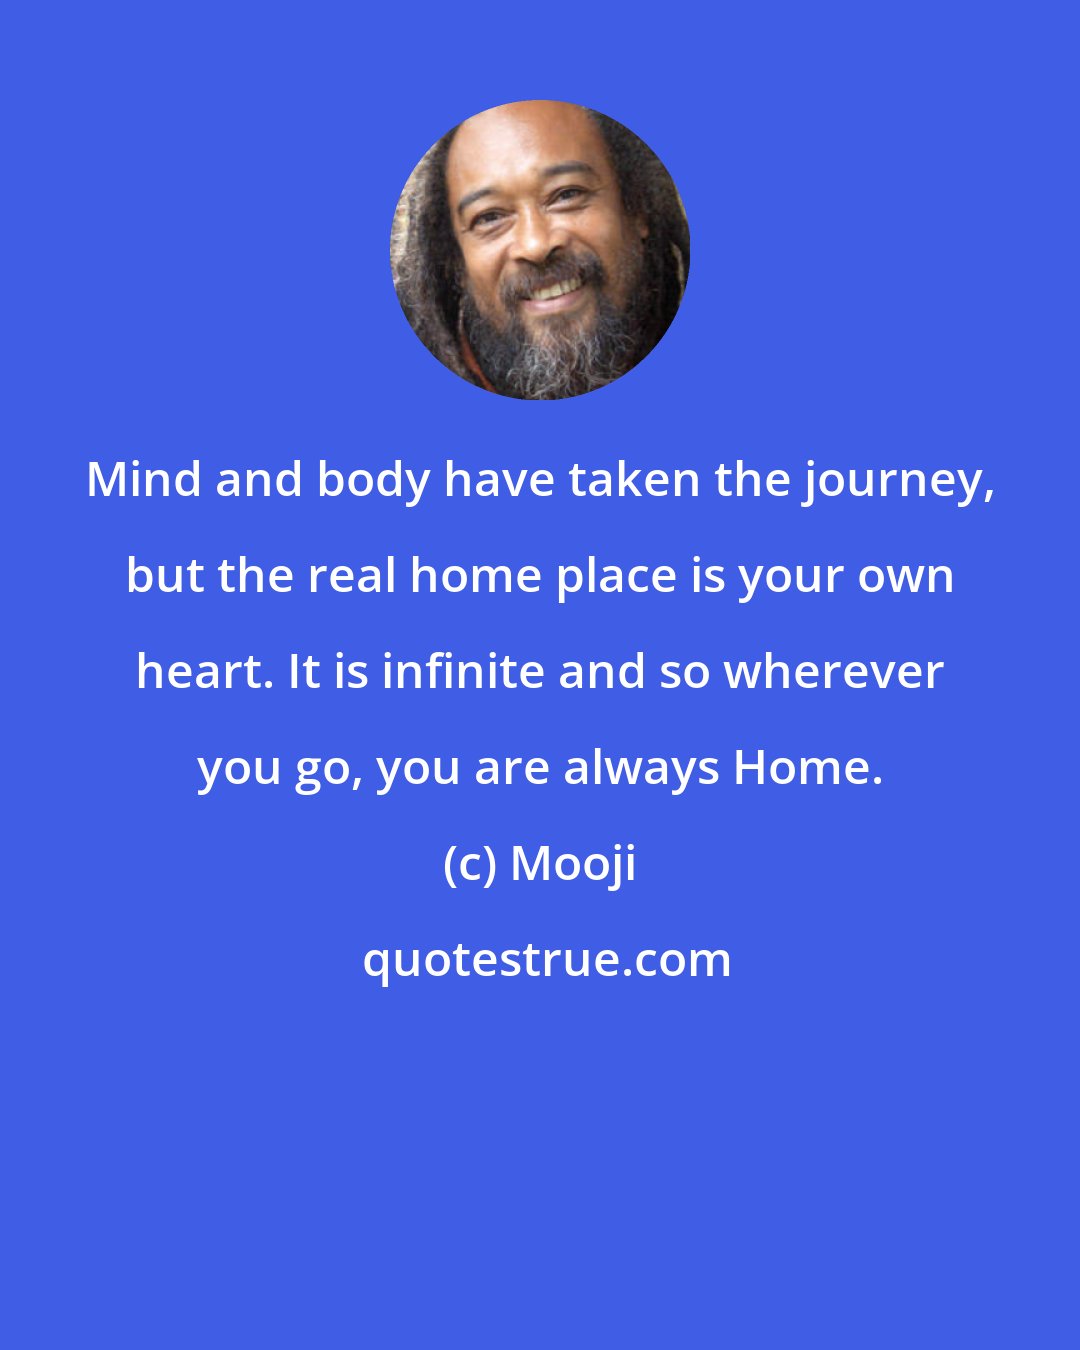 Mooji: Mind and body have taken the journey, but the real home place is your own heart. It is infinite and so wherever you go, you are always Home.